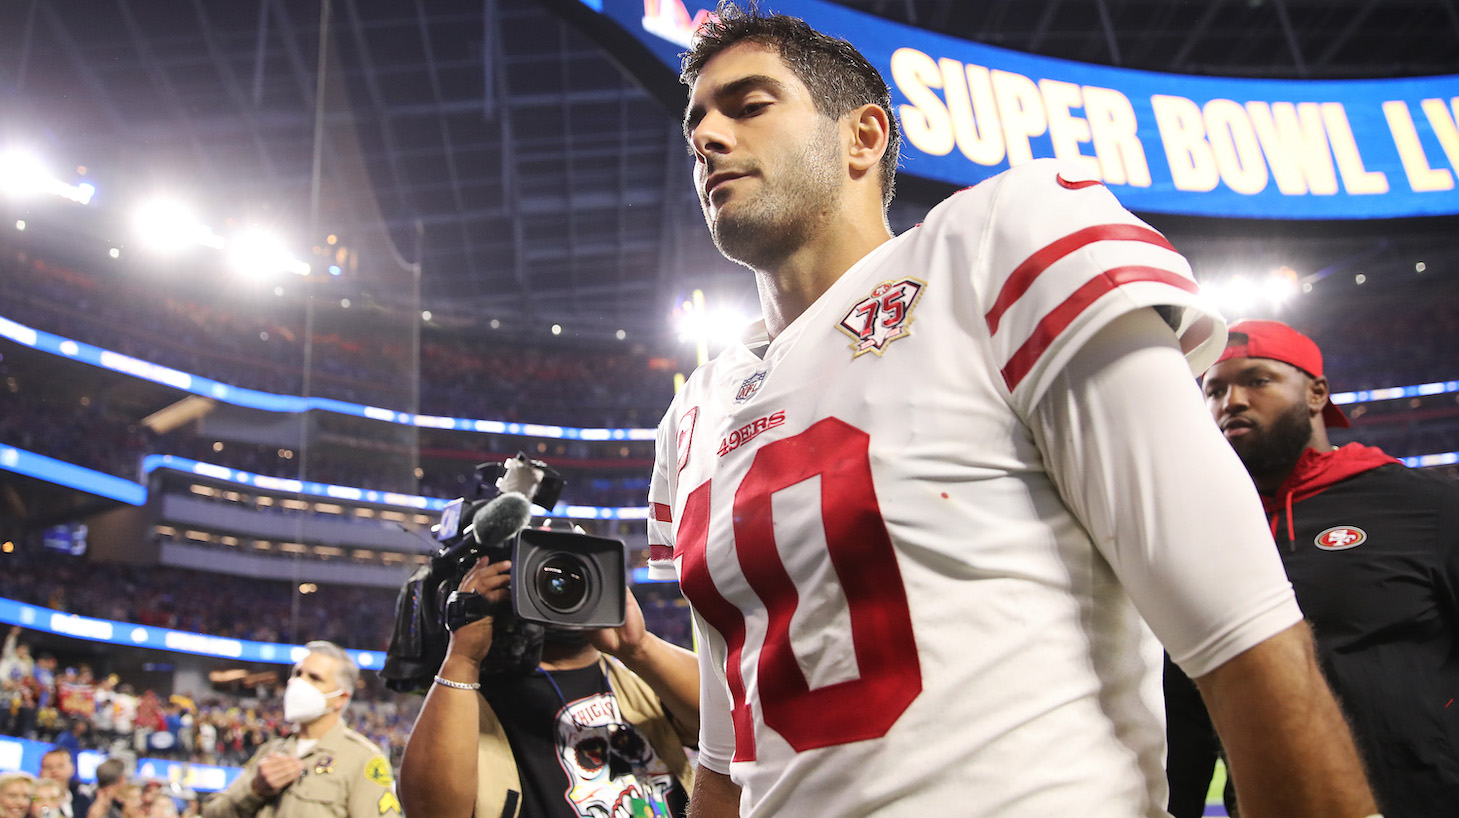 INGLEWOOD, CALIFORNIA - JANUARY 30: Jimmy Garoppolo #10 of the San Francisco 49ers walks off the field after being defeated by the Los Angeles Rams in the NFC Championship Game at SoFi Stadium on January 30, 2022 in Inglewood, California. The Rams defeated the 49ers 20-17. (Photo by Christian Petersen/Getty Images)